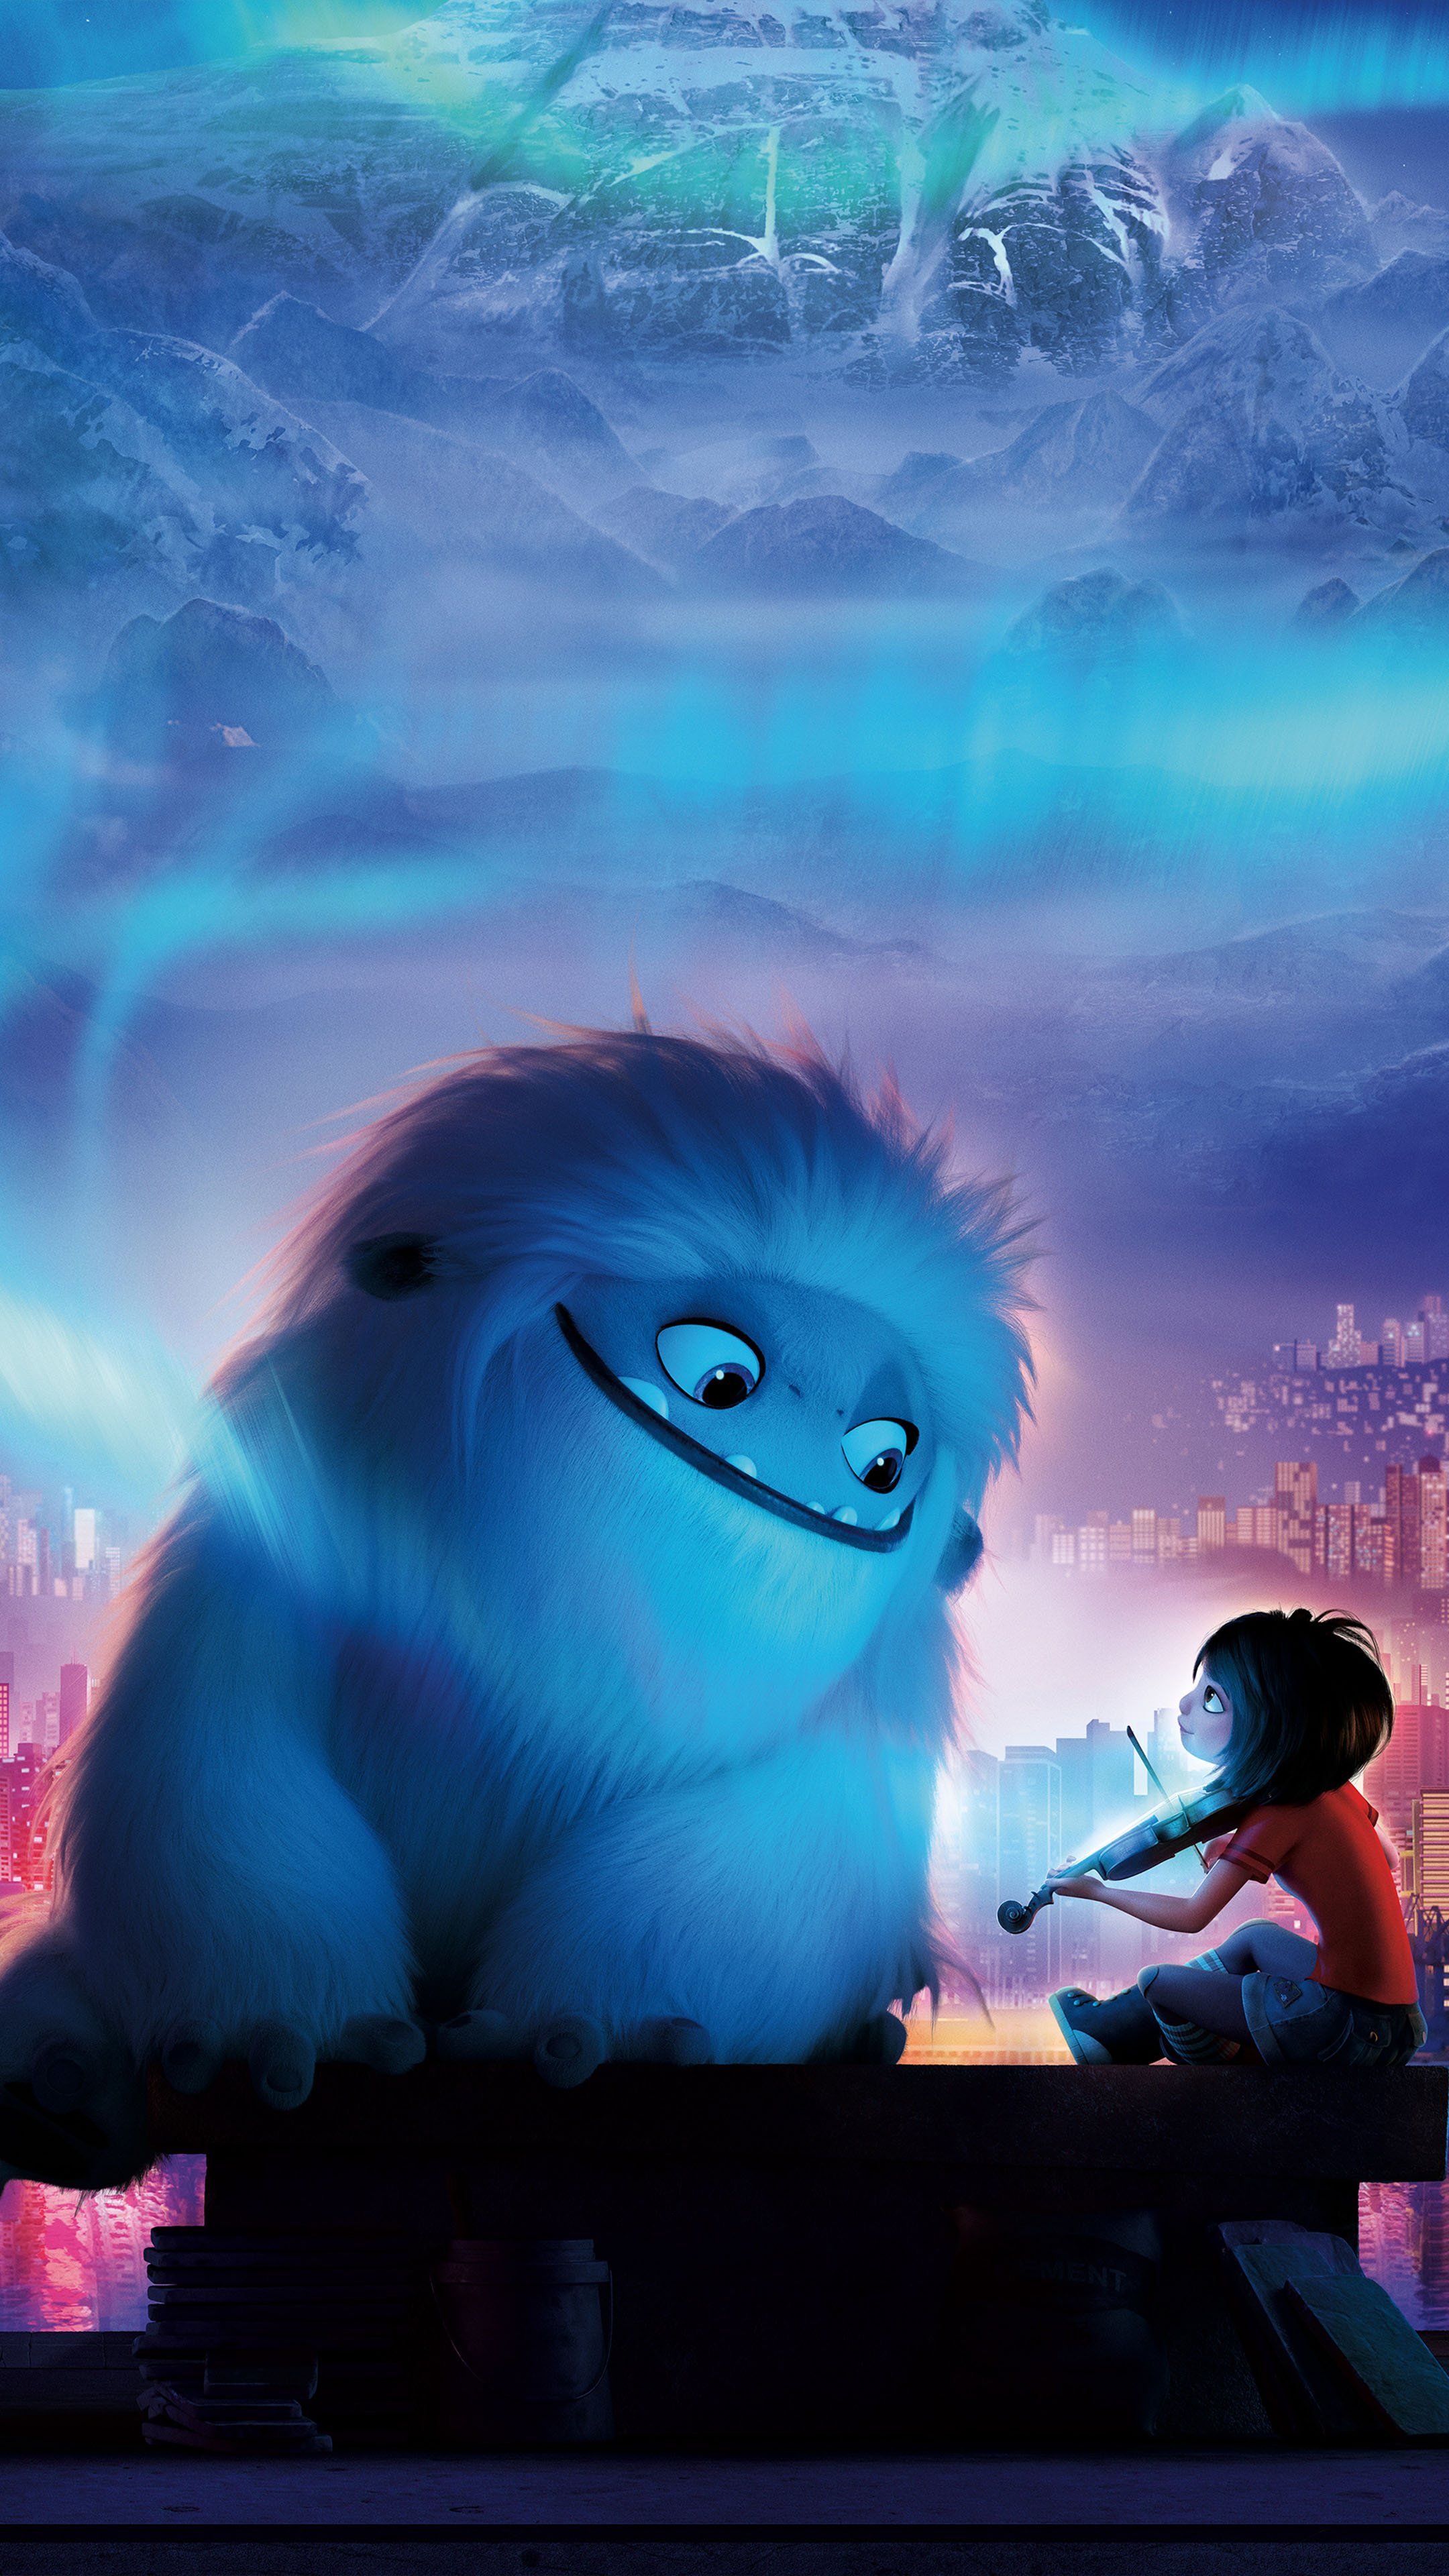 Abominable Animation 2019 Adventure Free 4K Ultra HD ...